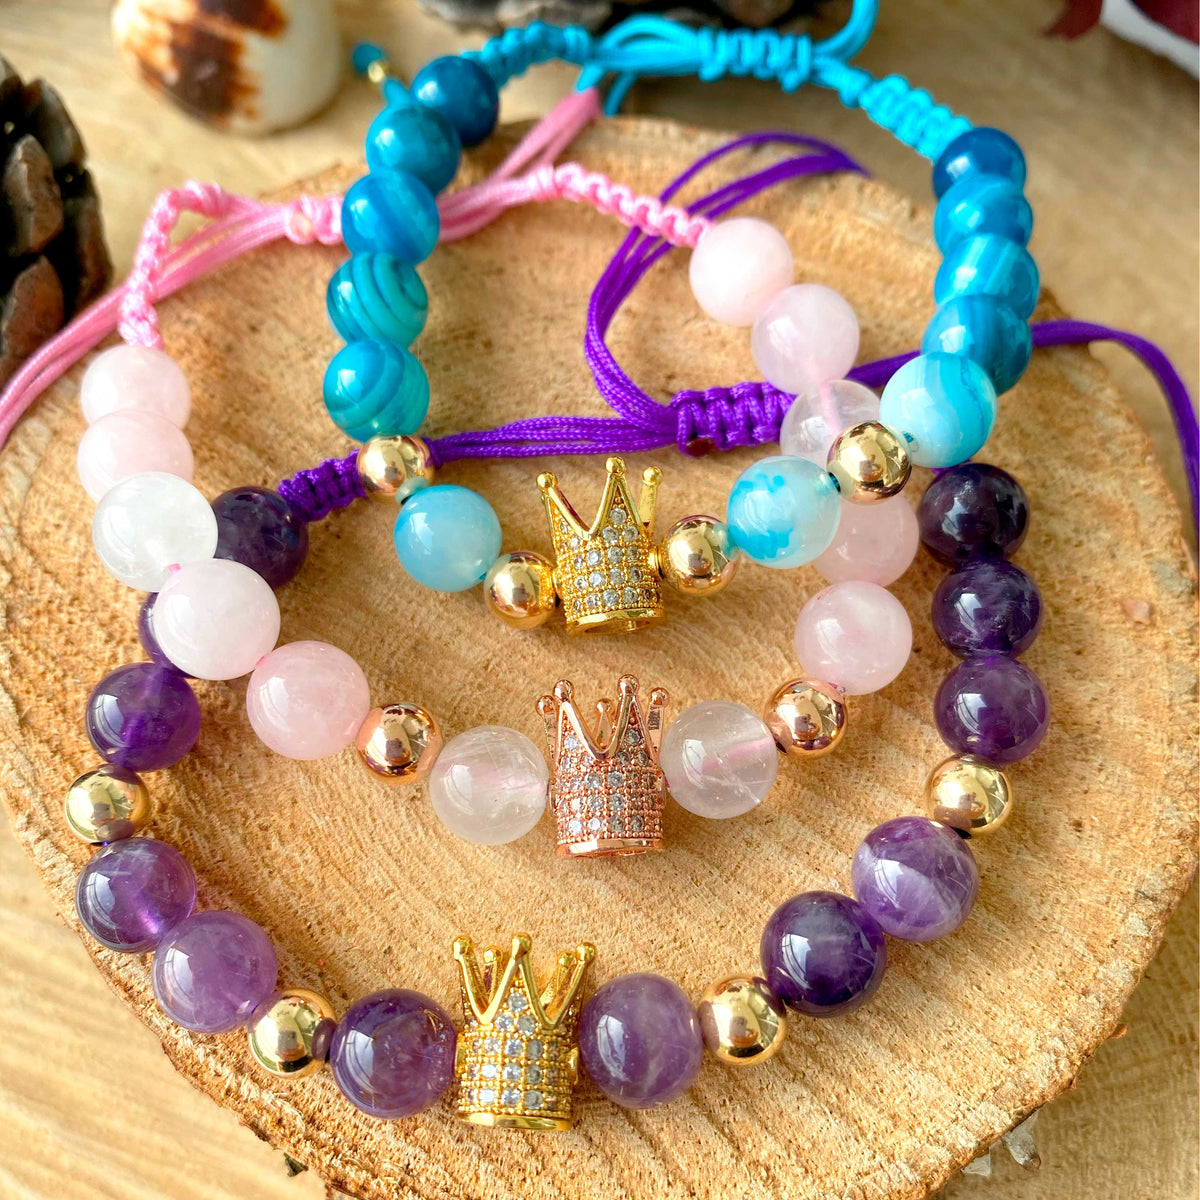 BRACELETS WITH MAGICAL CRYSTALS